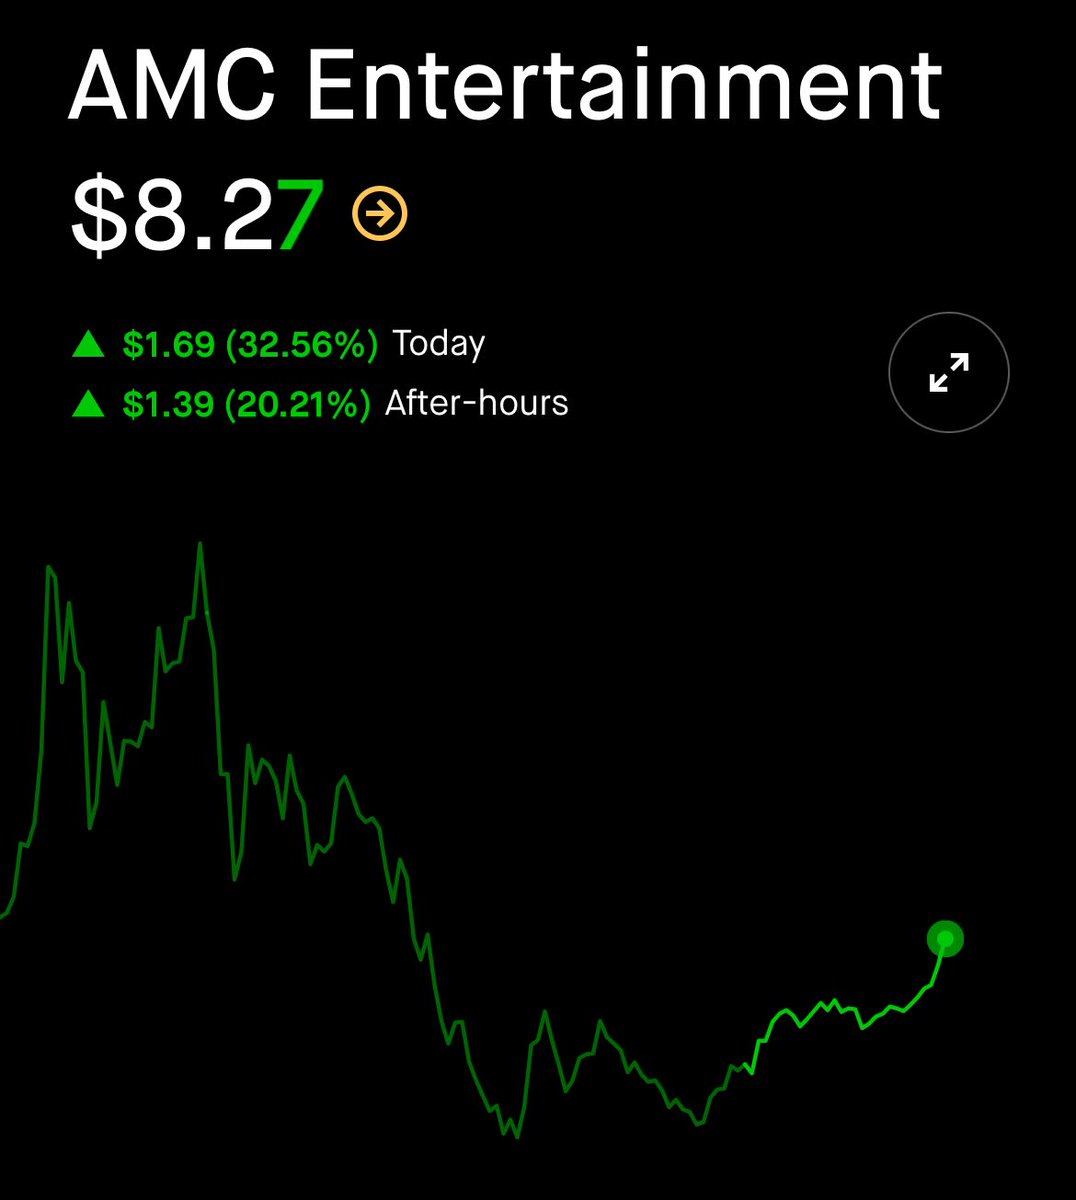 $AMC is running - up 20% after hours when the Option market makers can’t fuck around. This shit is shorted and we want to buy it - why can’t we? We just like the stock.